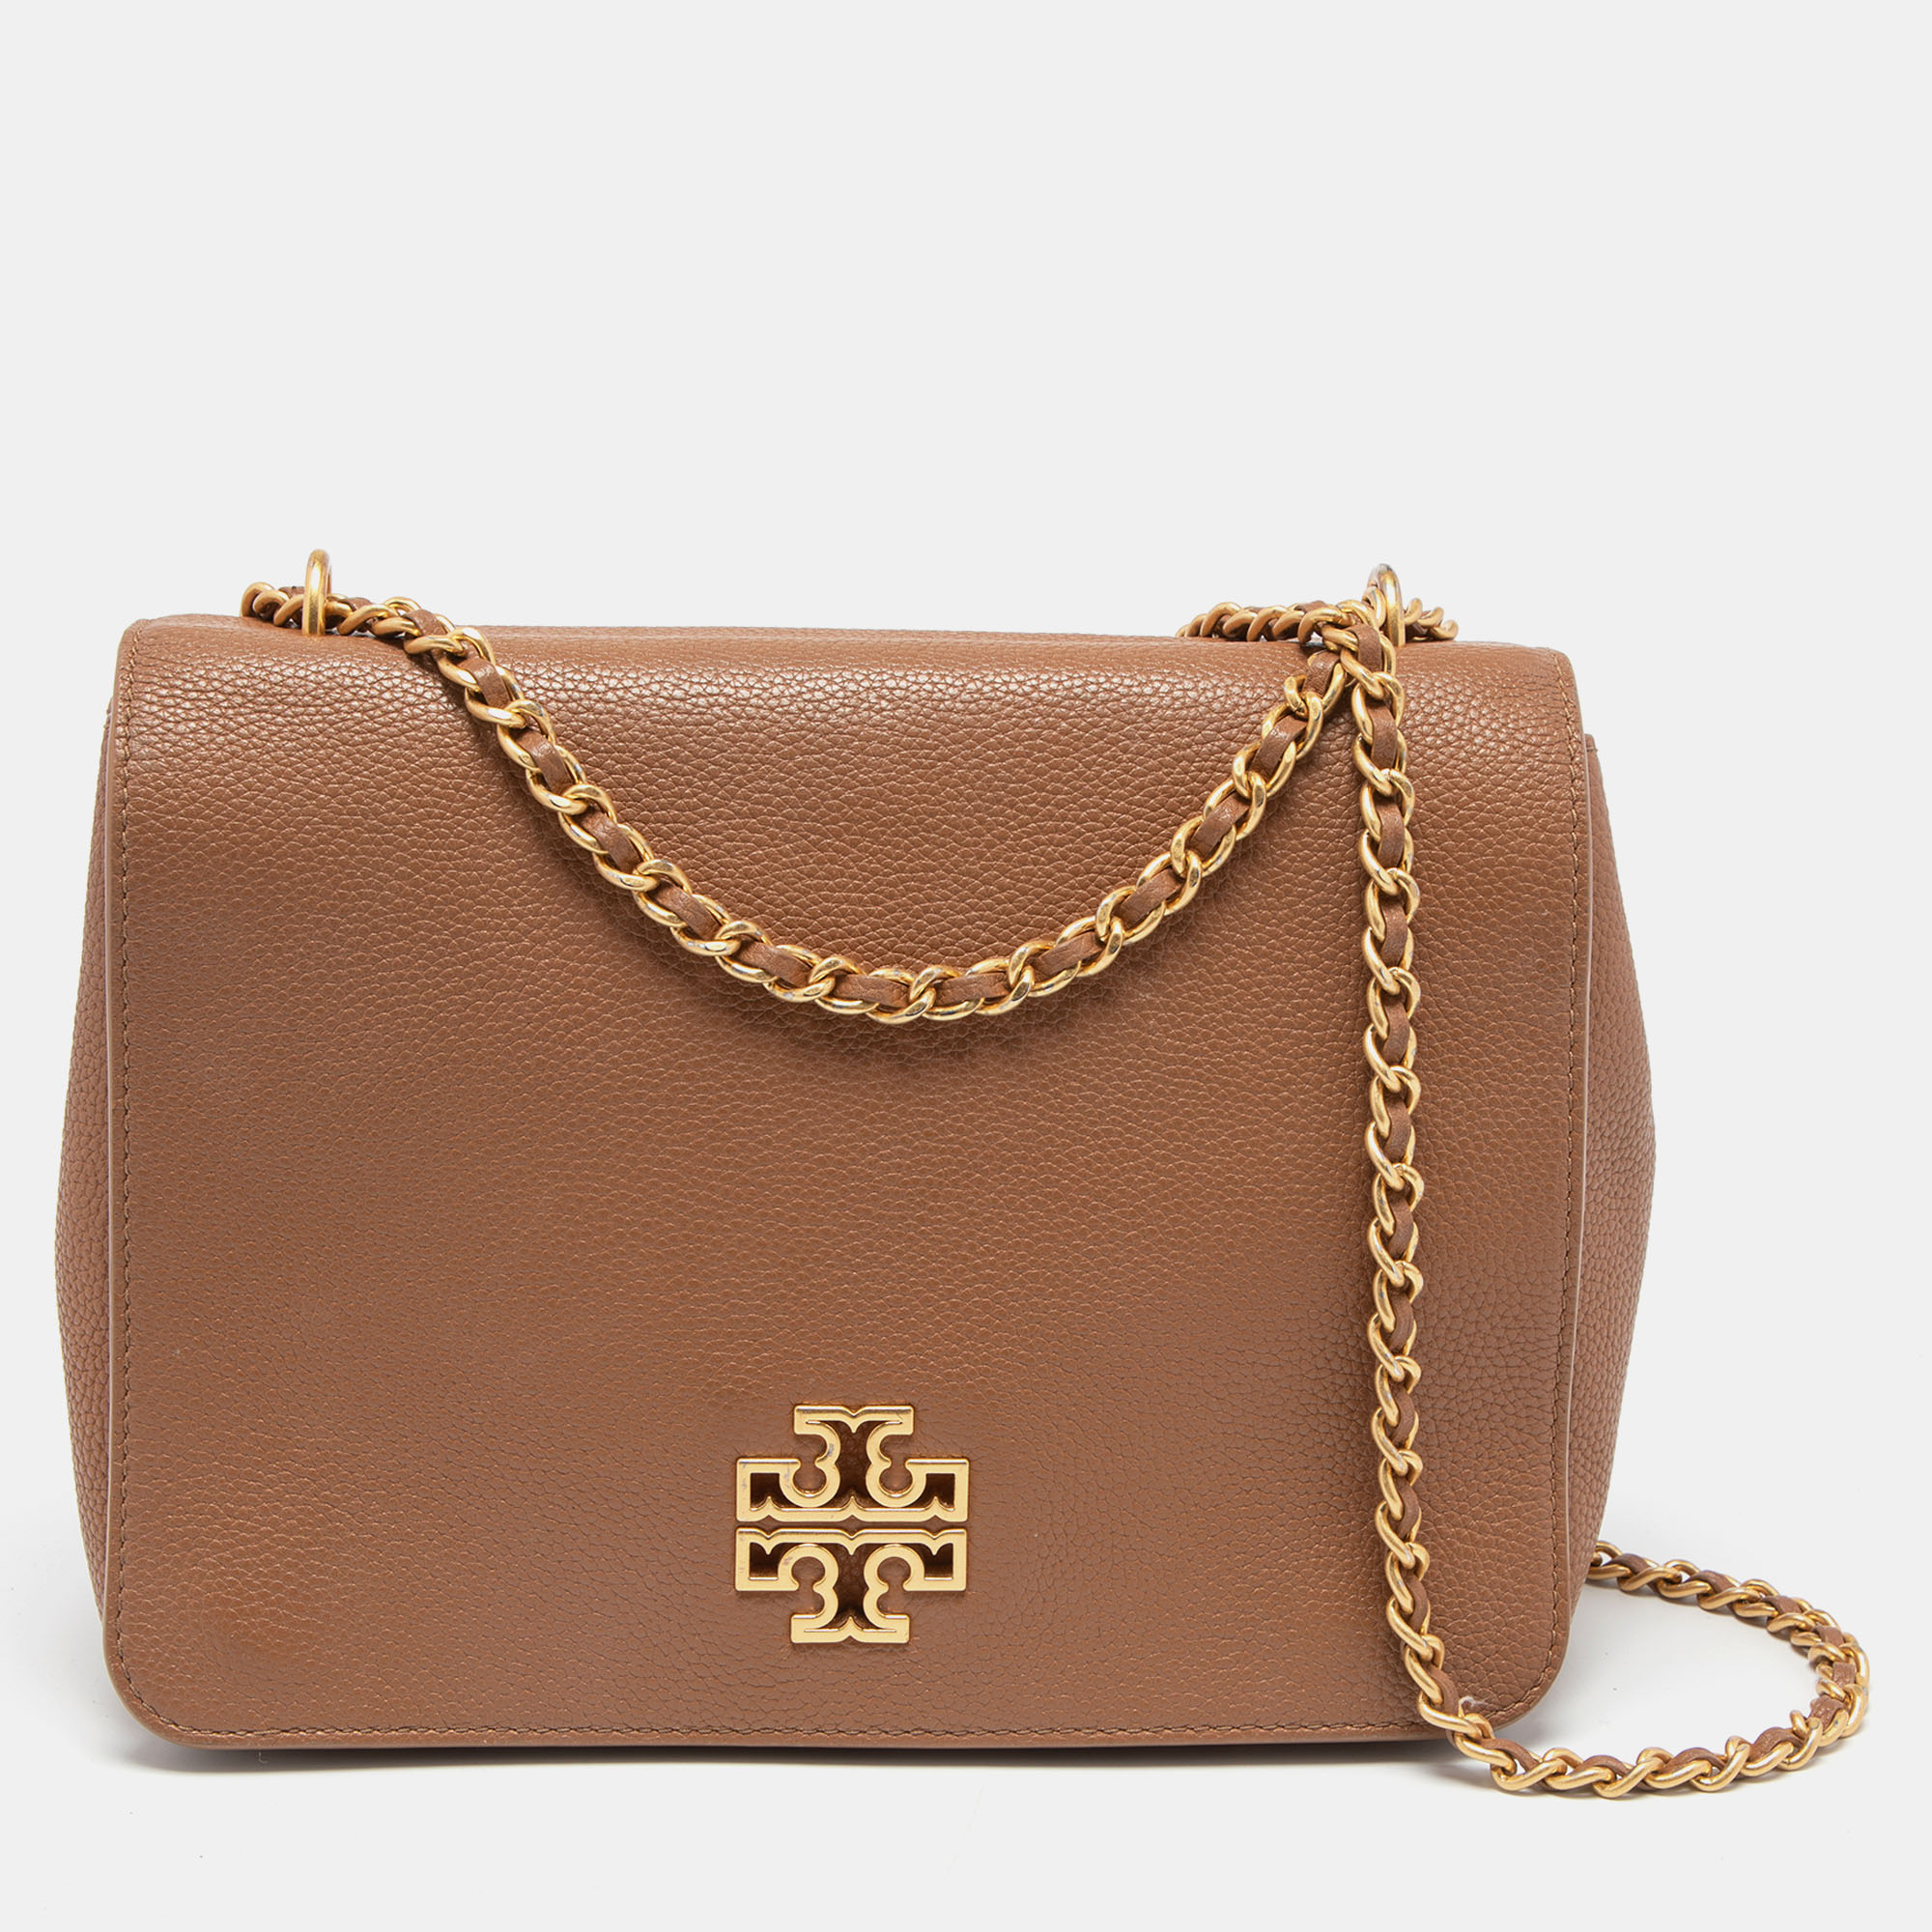 Pre-owned Tory Burch Brown Leather Britten Flap Crossbody Bag